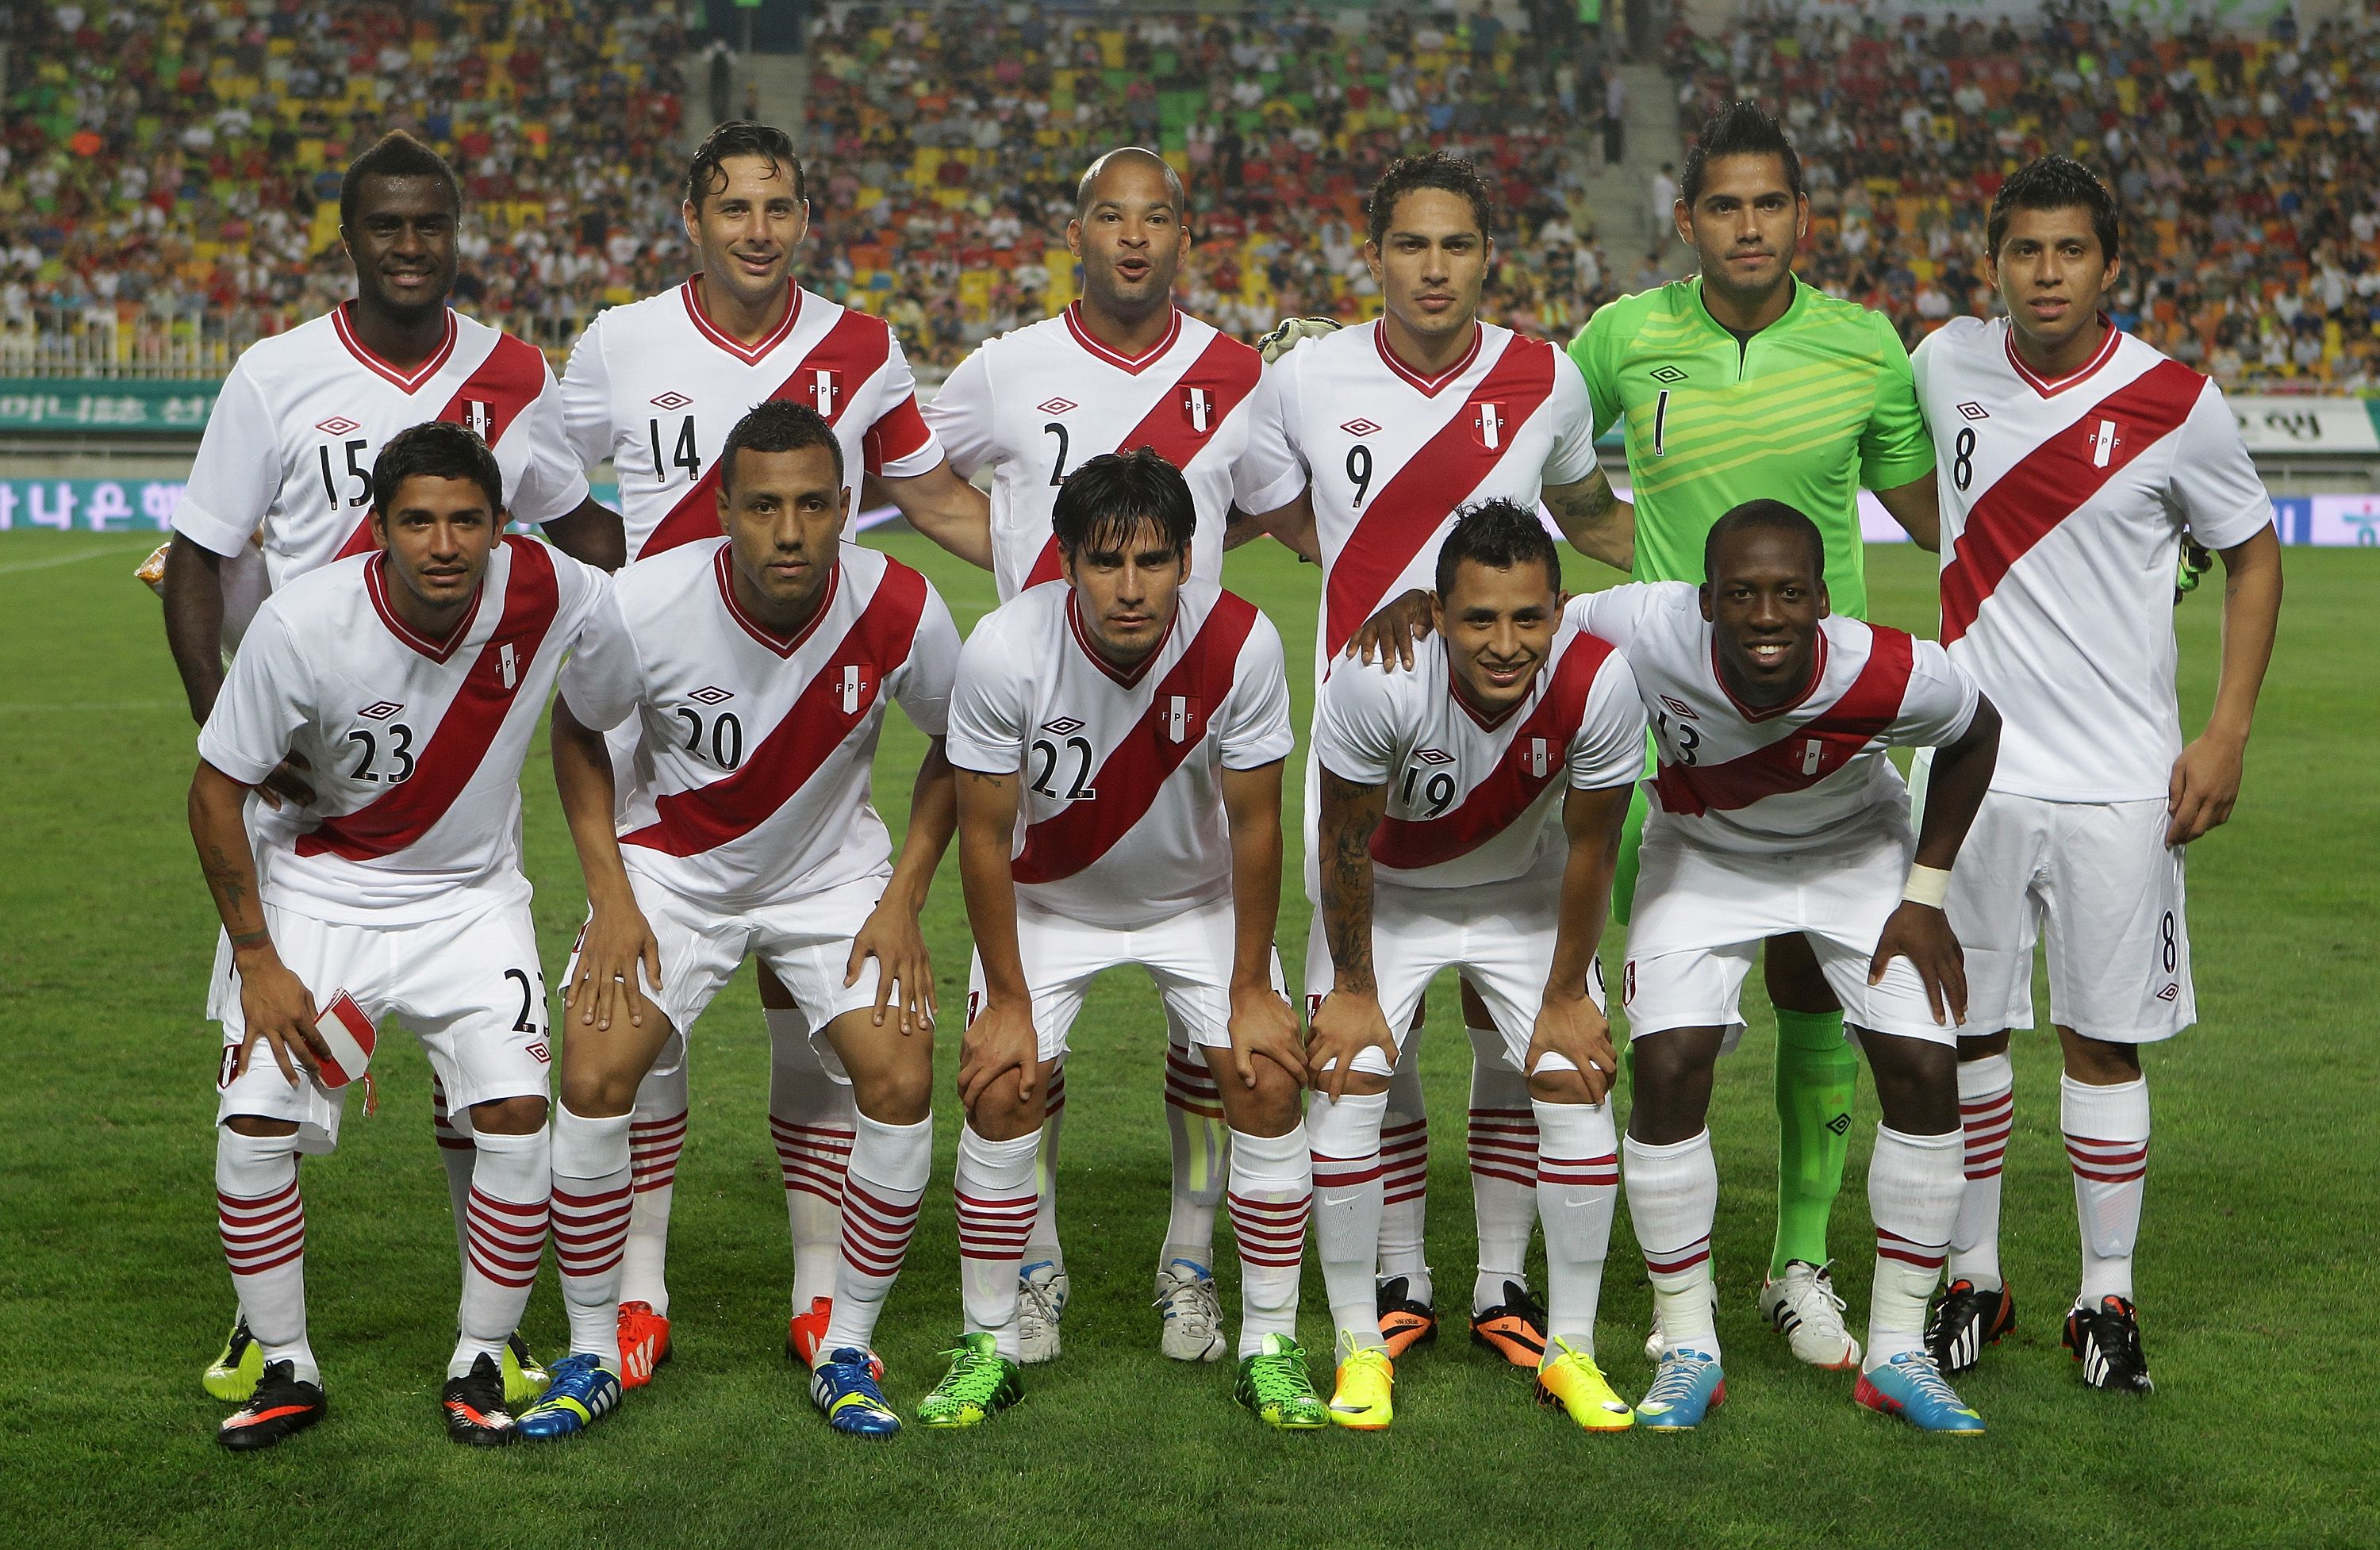 Daily Life: This image is of the Peru Football Team of 2016. There